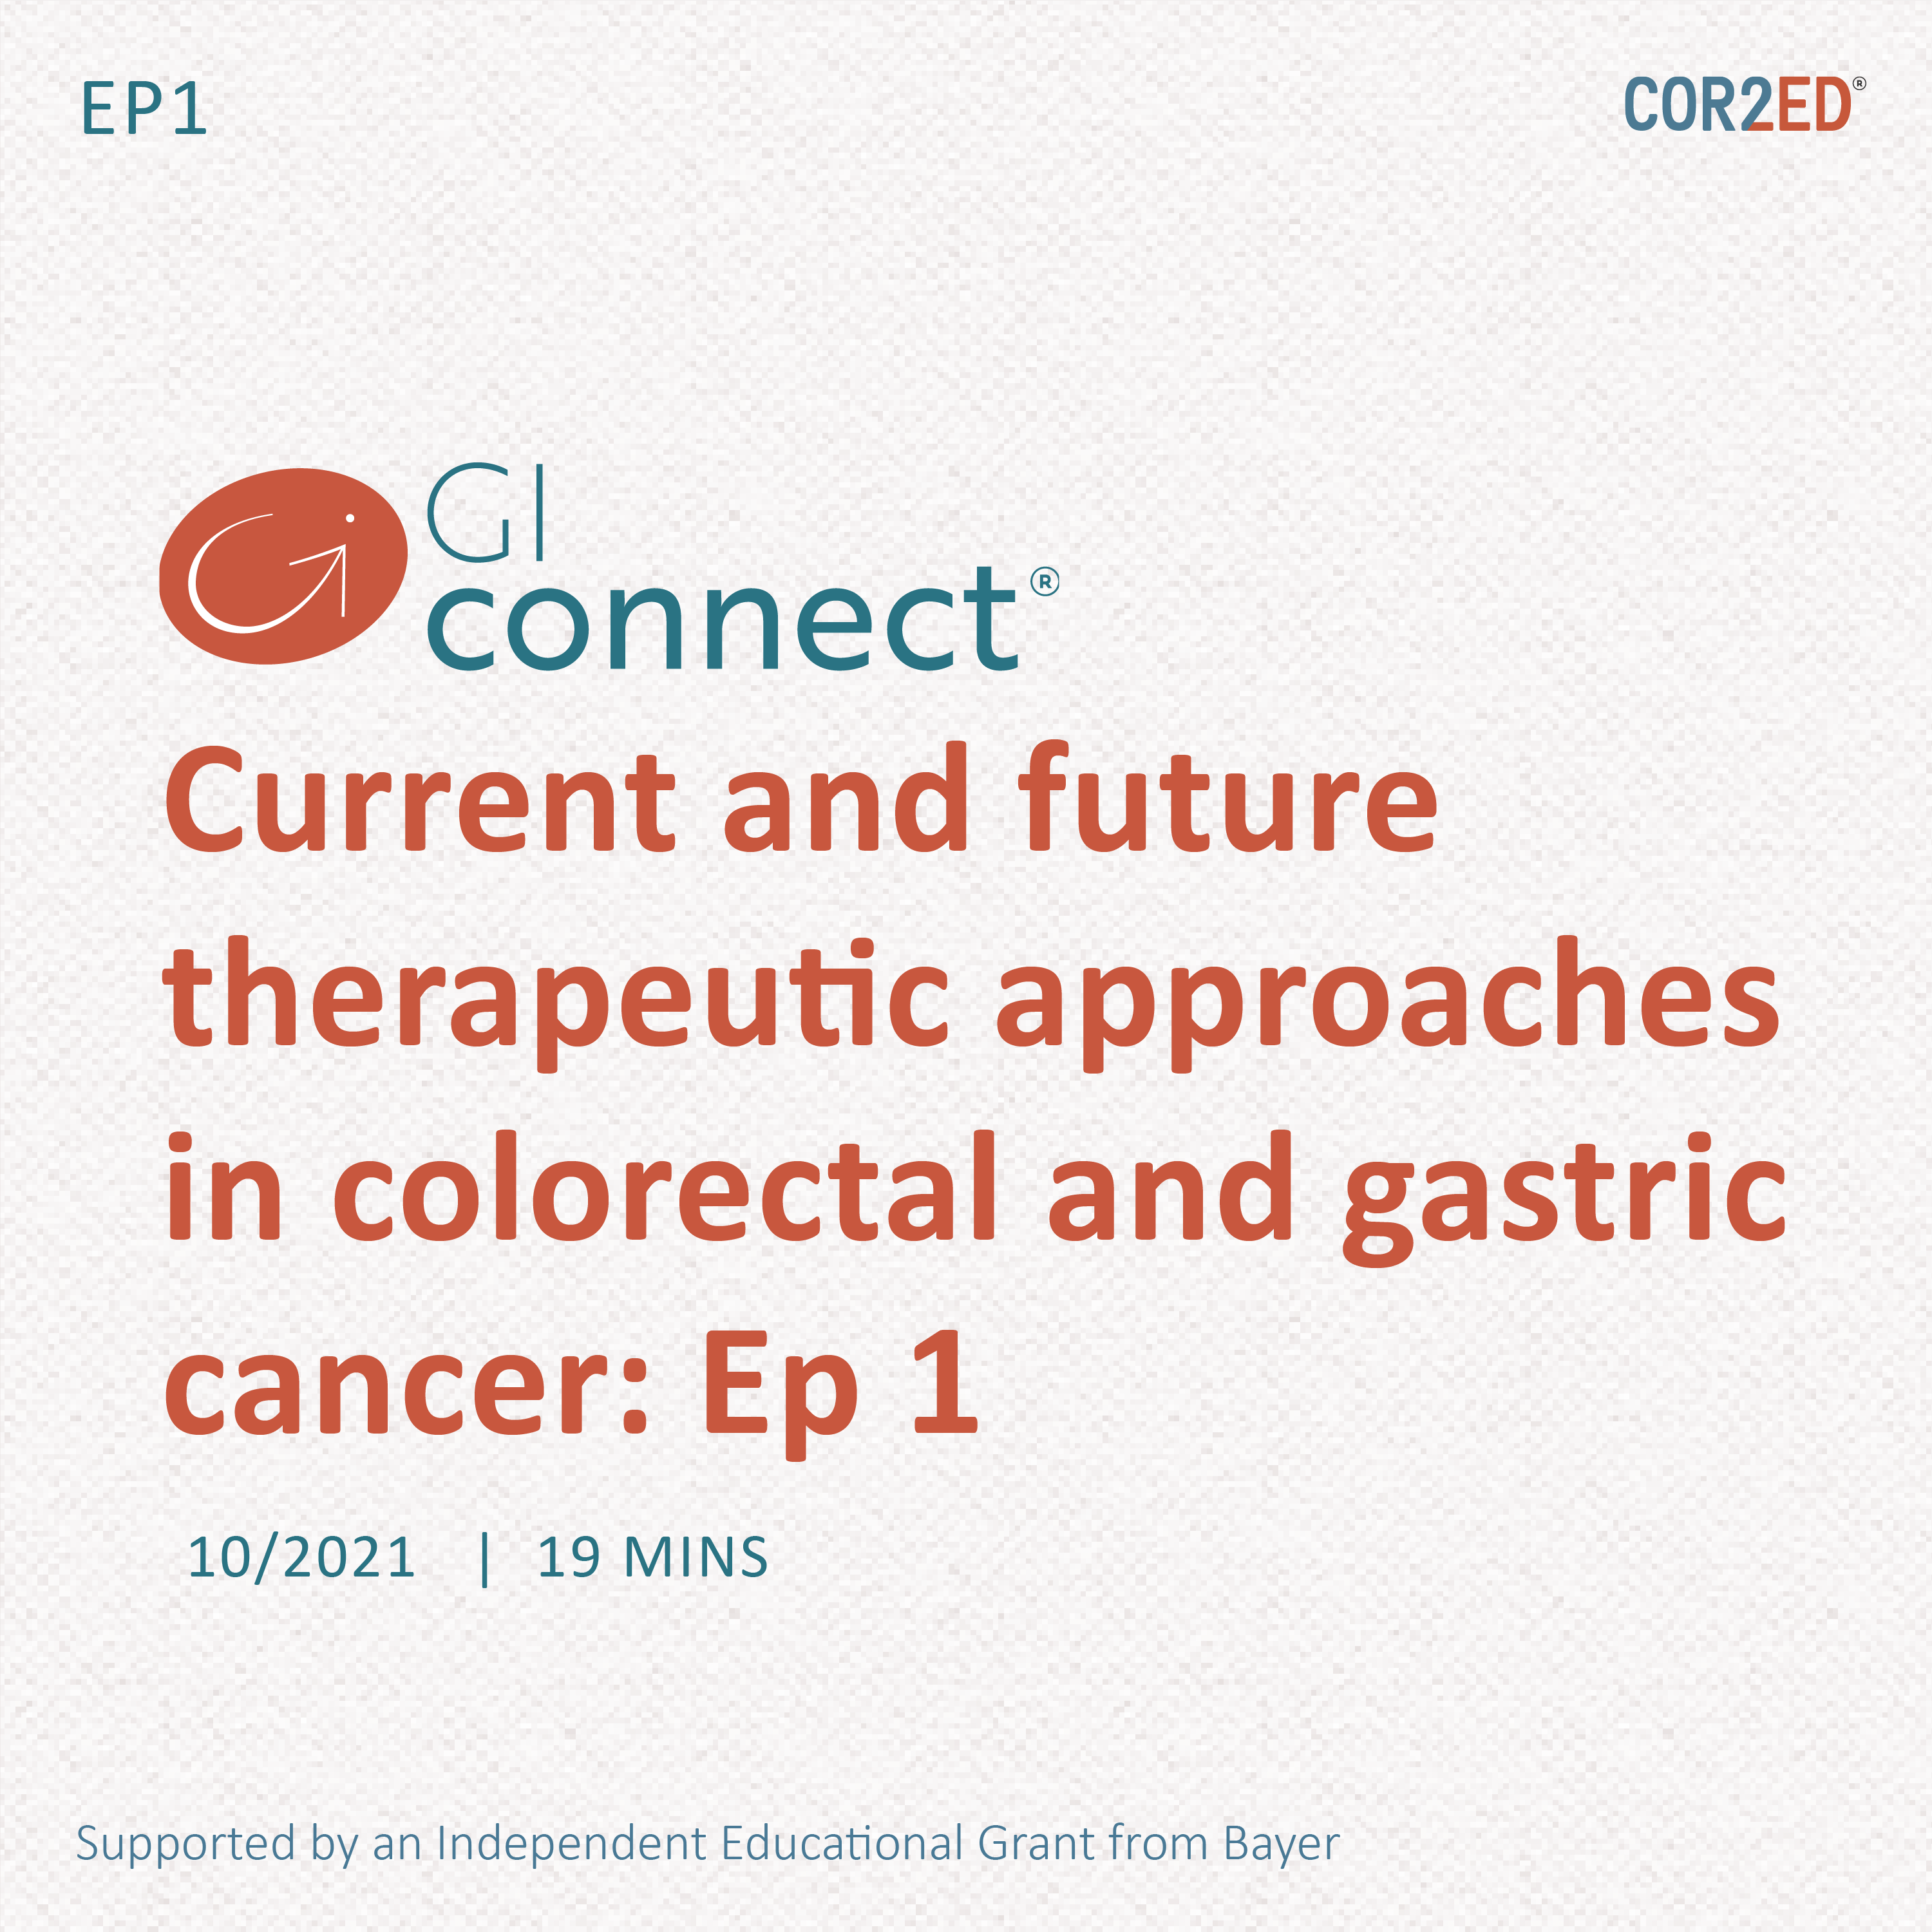 Current and Future Therapeutic Approaches in Colorectal and Gastric Cancer: Targeted Therapy - Ep 1